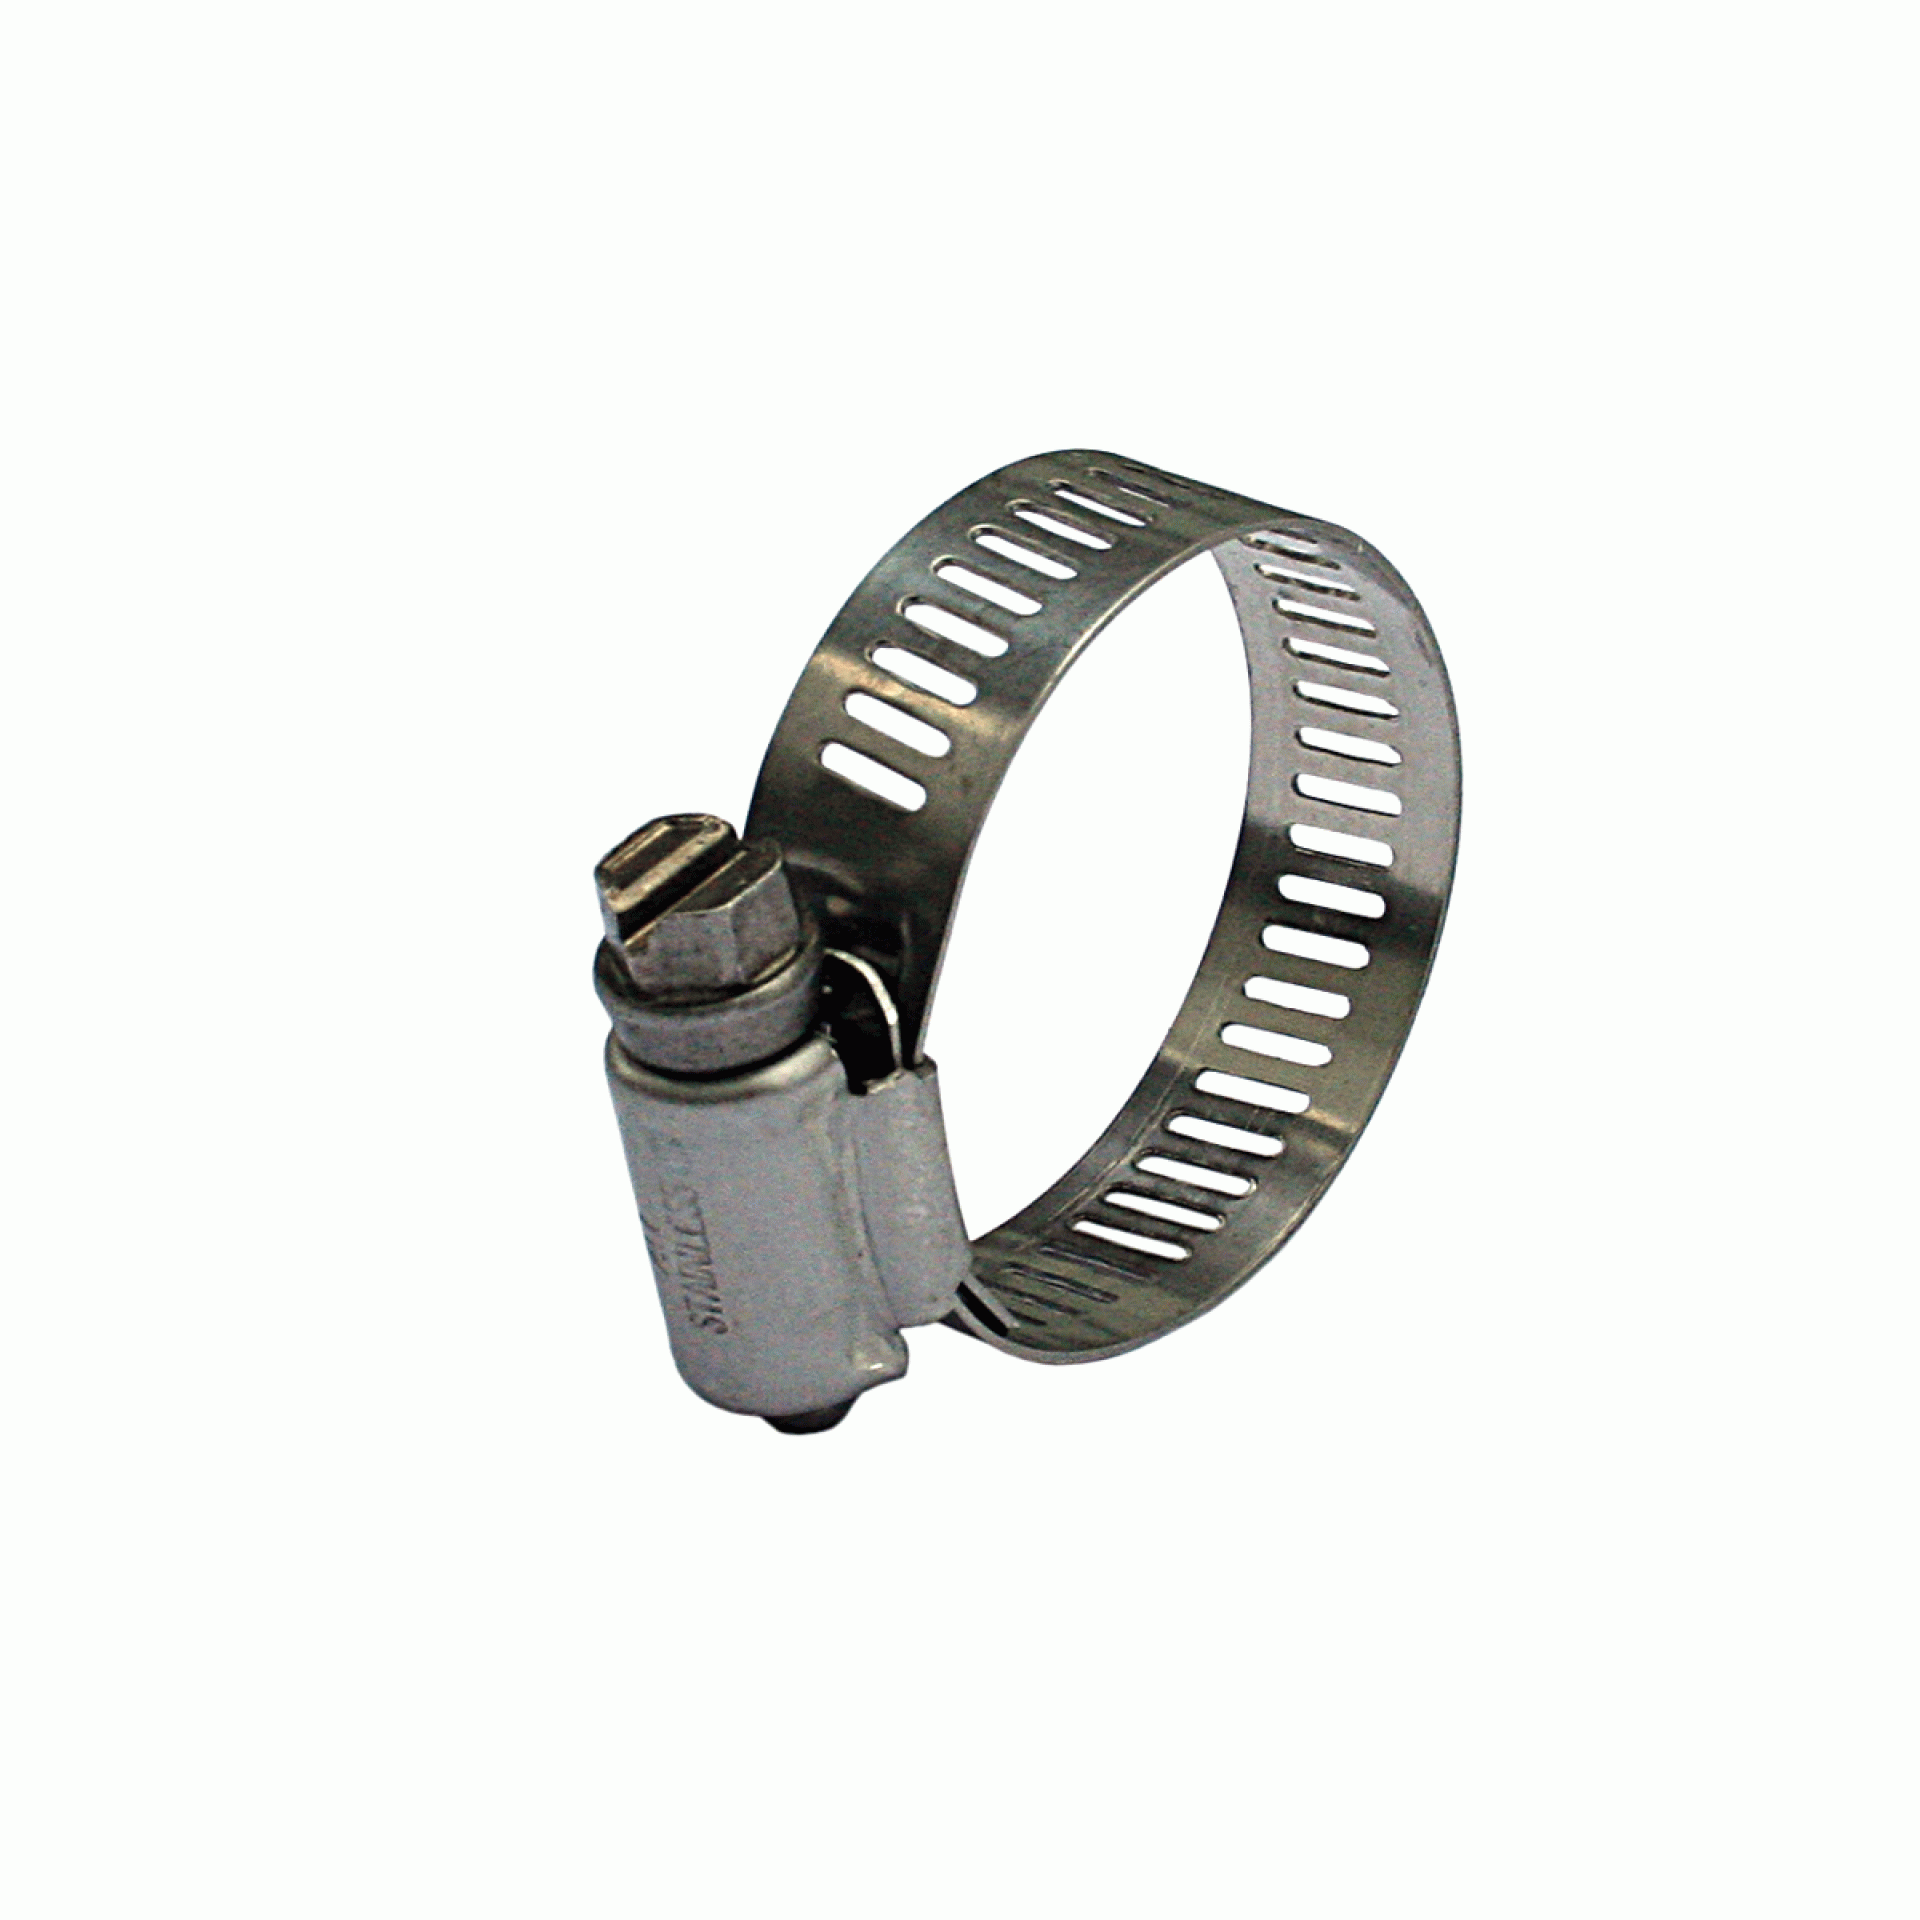 DUPAGE PRODUCTS GROUP | B20HS | DIA MIN. 3/4"- MAX 1-3/4" FITS HOSE: 1" TO 1-1/4"